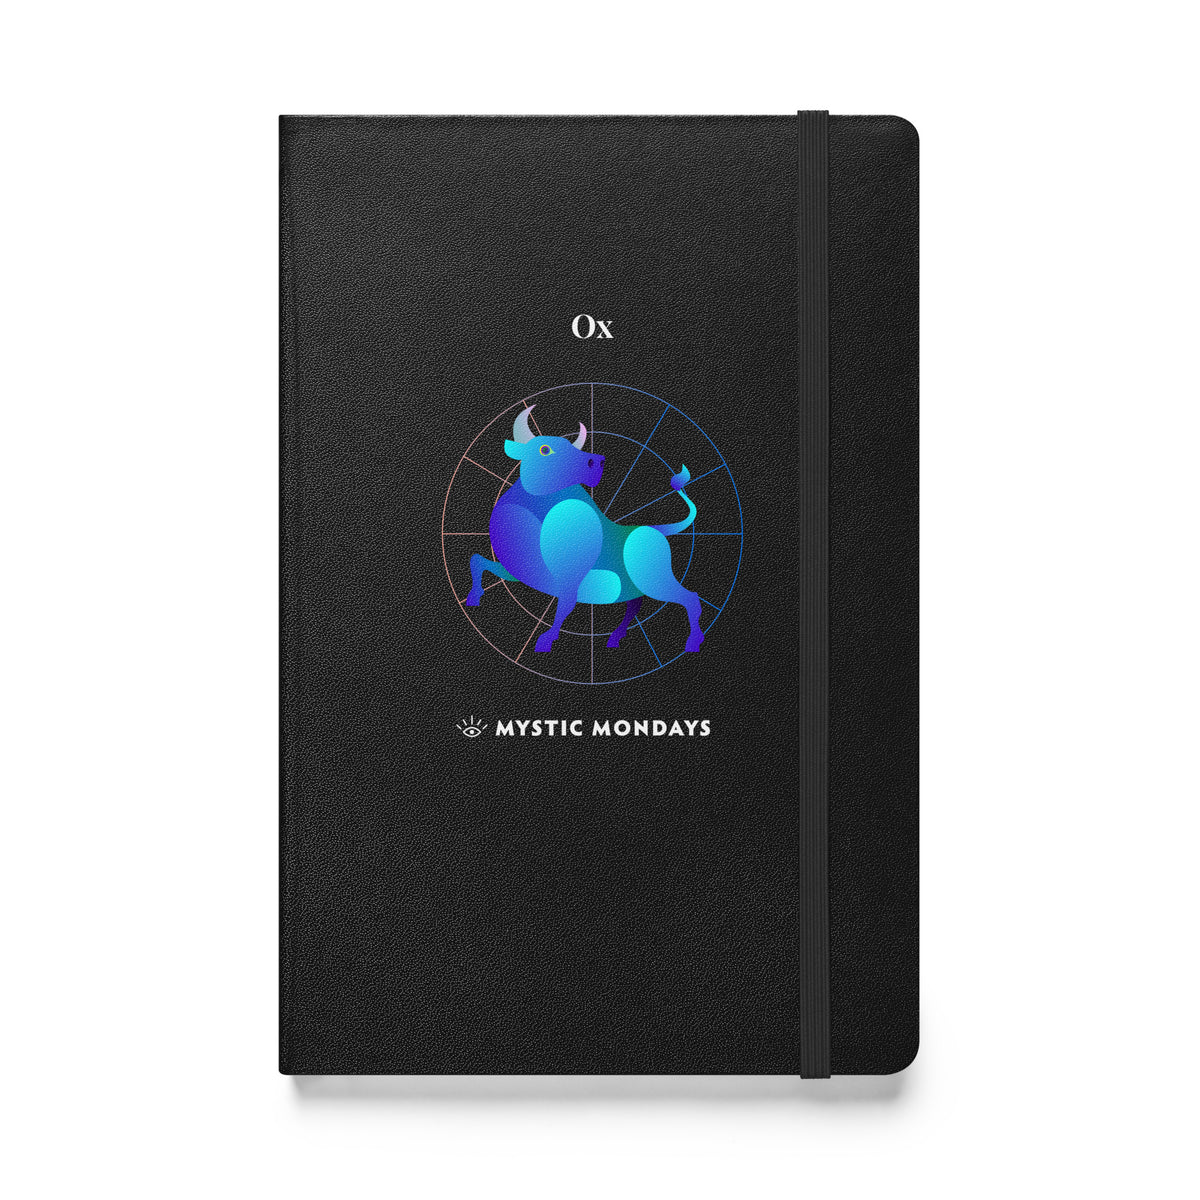 Ox Hardcover Journal